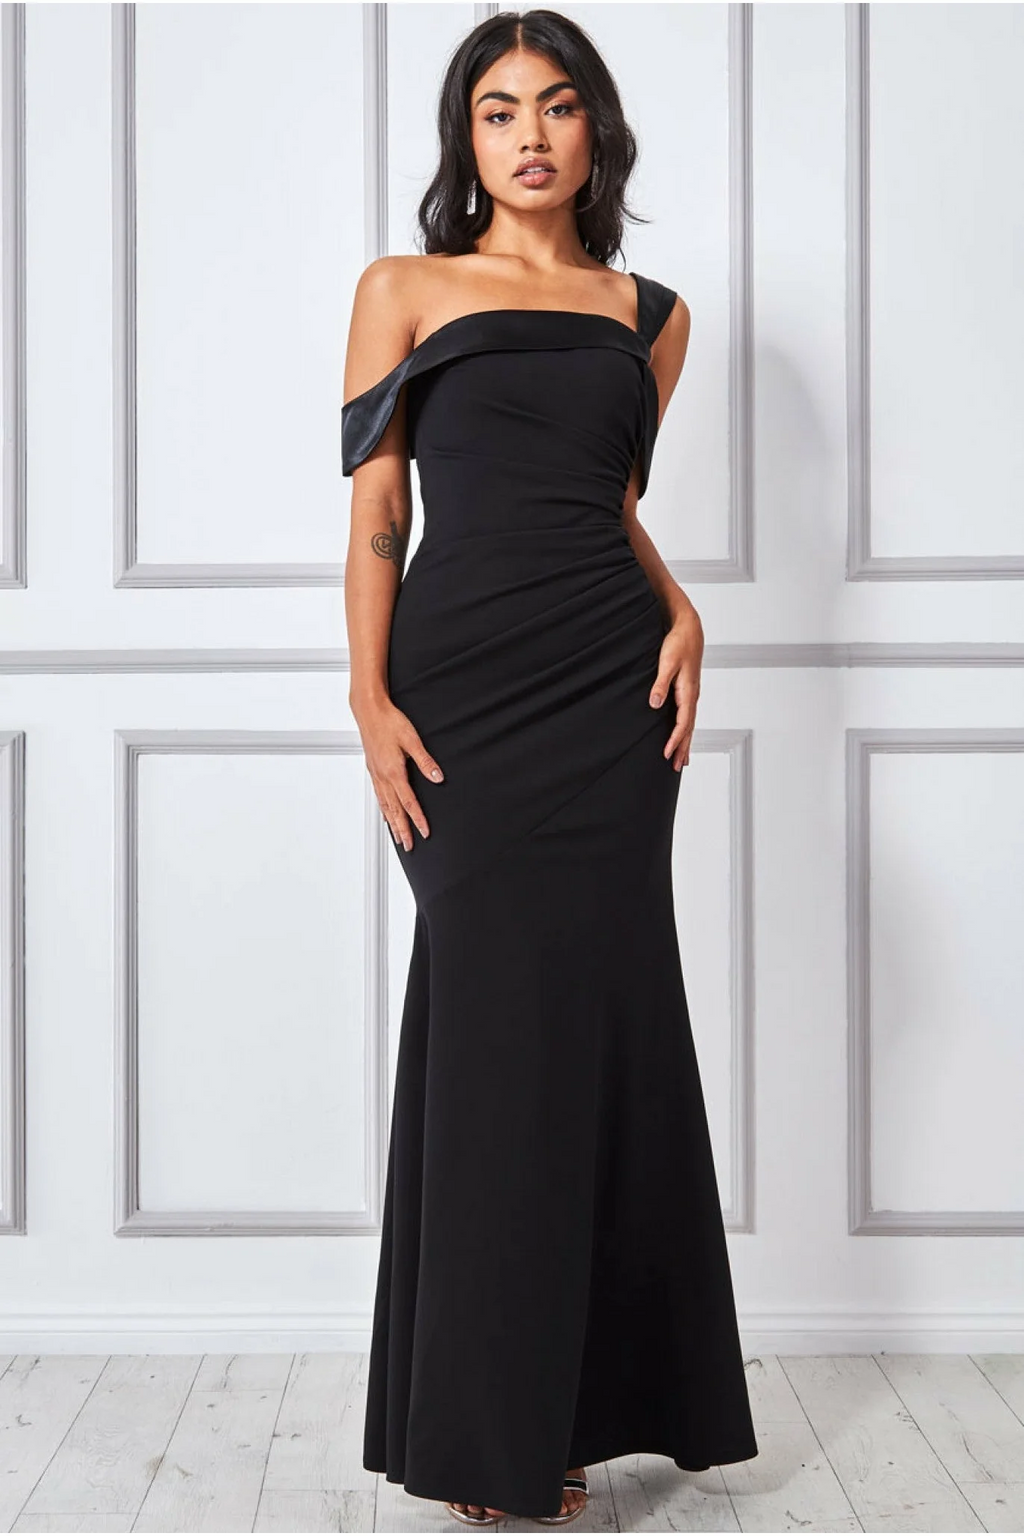 One Shoulder Dress (Black-Size 8) Prom, Ball, Wedding Guest, Races, Formal Event, Races, Cocktail, Prom